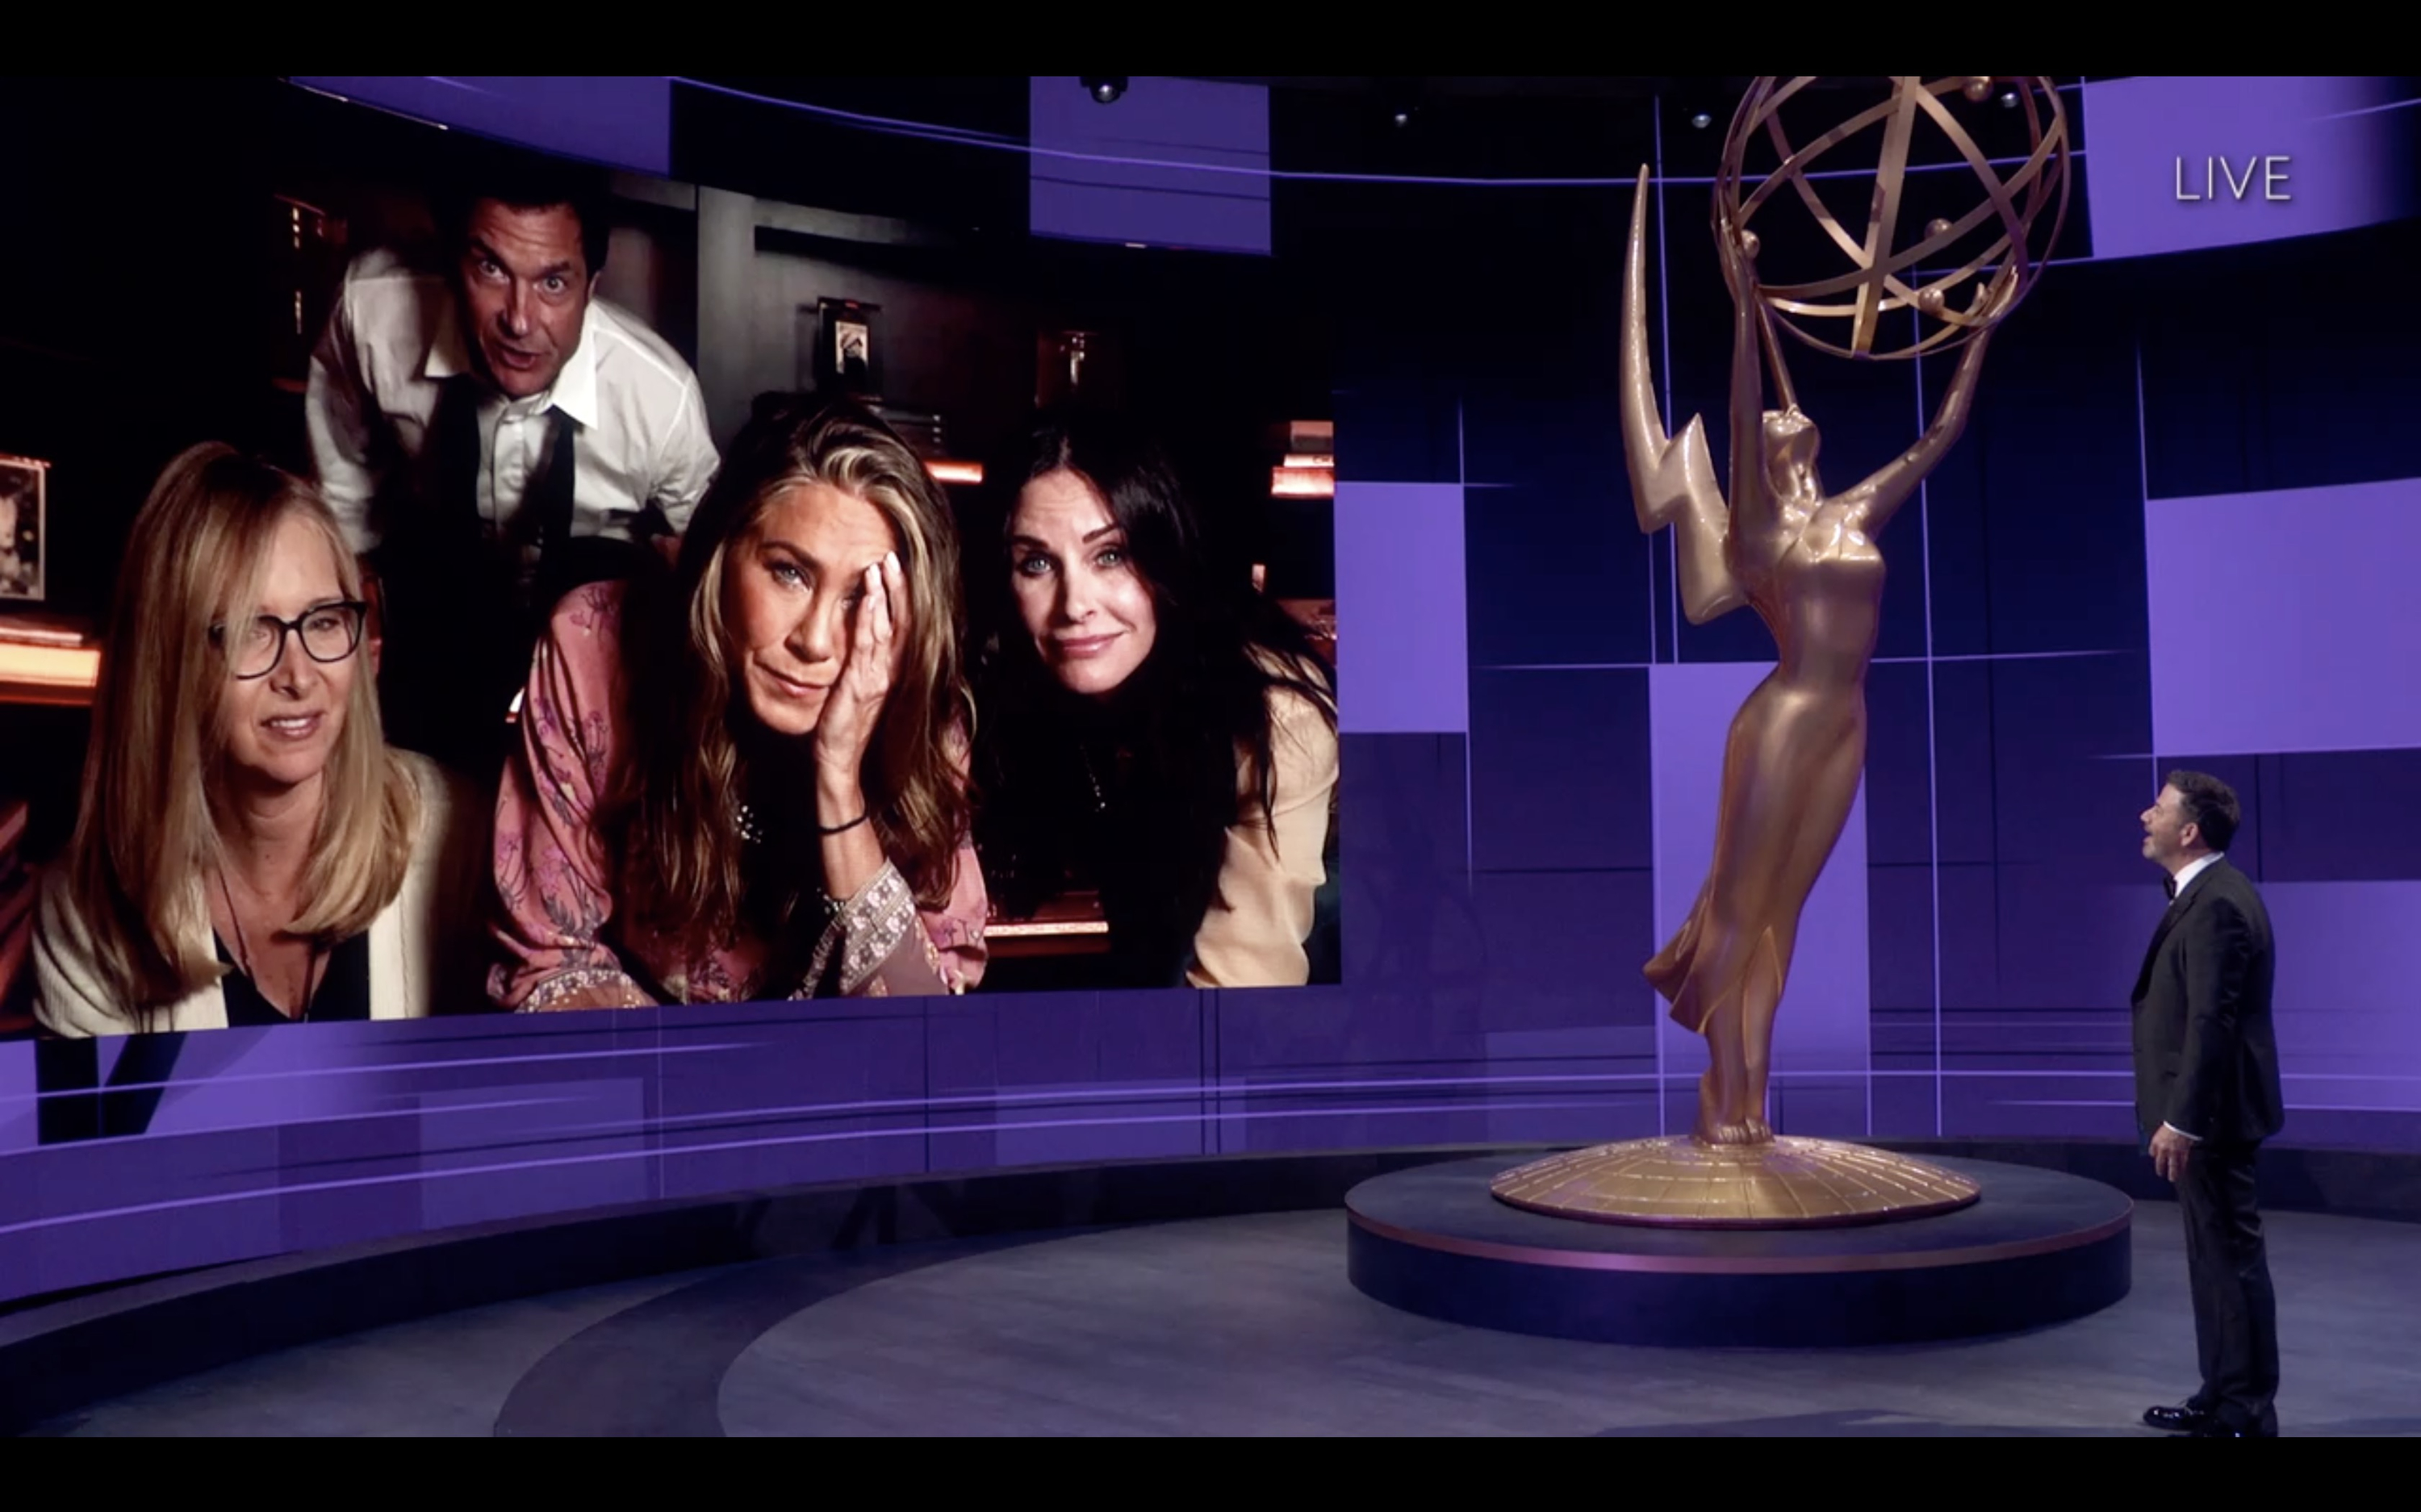 Lisa Kudrow, Jennifer Aniston, Courteney Cox and Jason Bateman attend the 72nd Annual Emmy Awards via Zoom. Jimmy Kimmel is standing on the stage